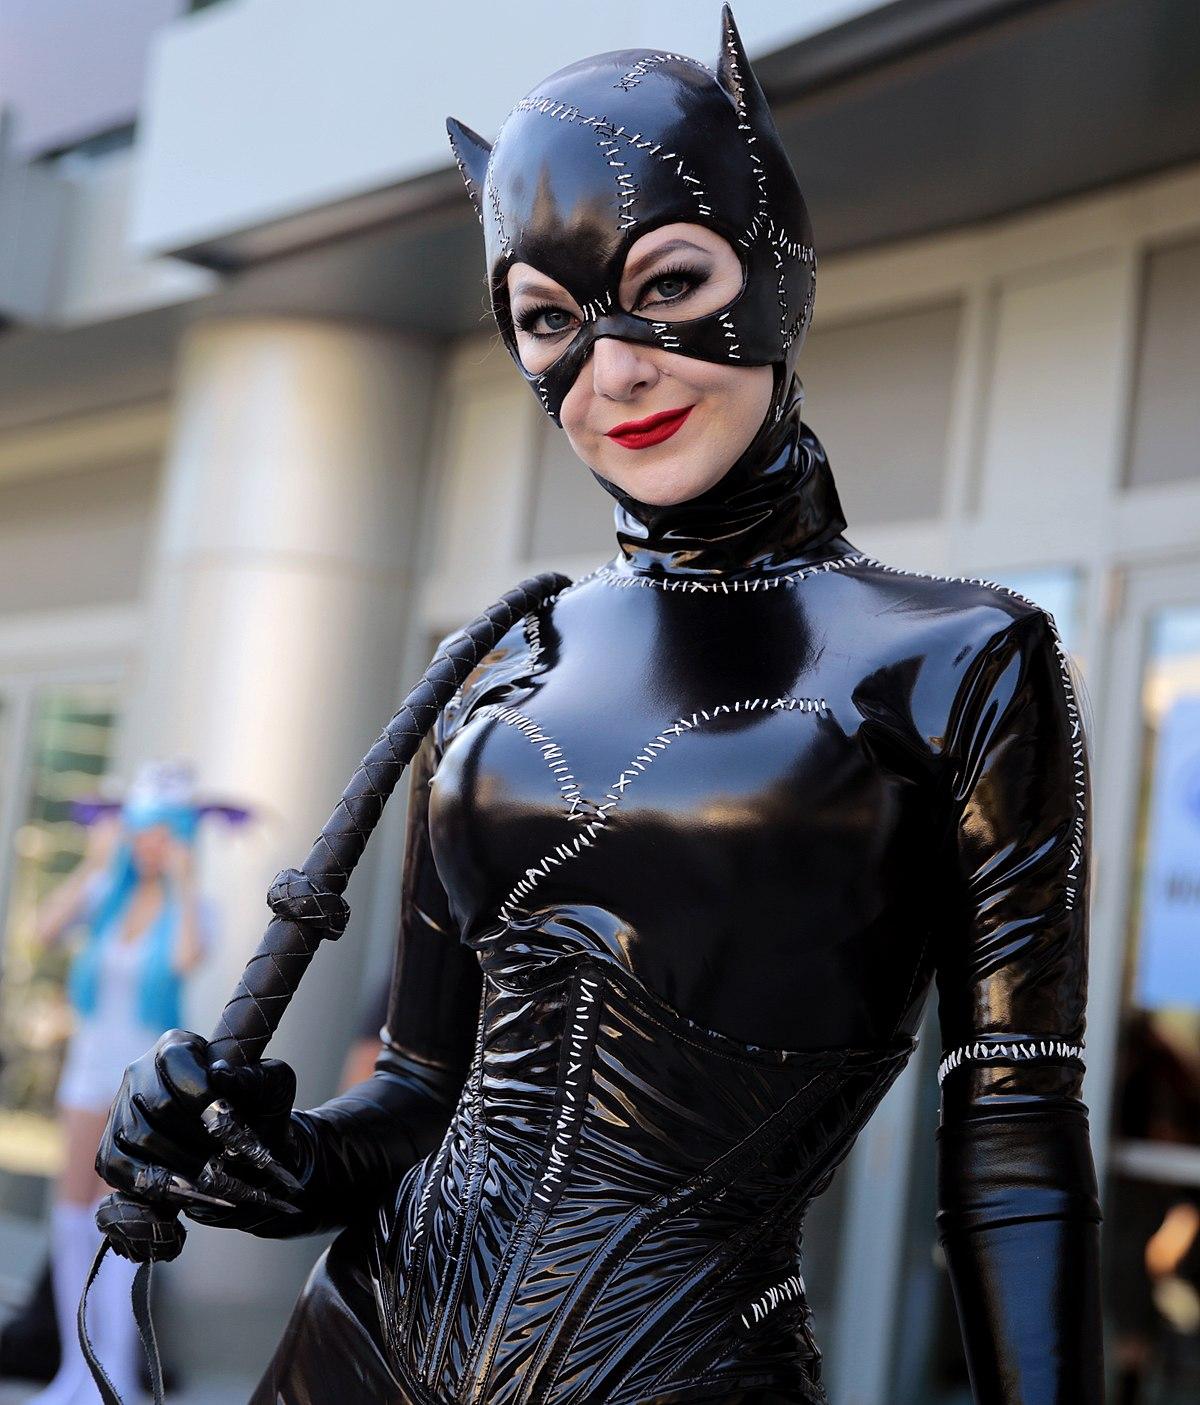 60+ Hot Pictures Of Catwoman From DC Comics 16